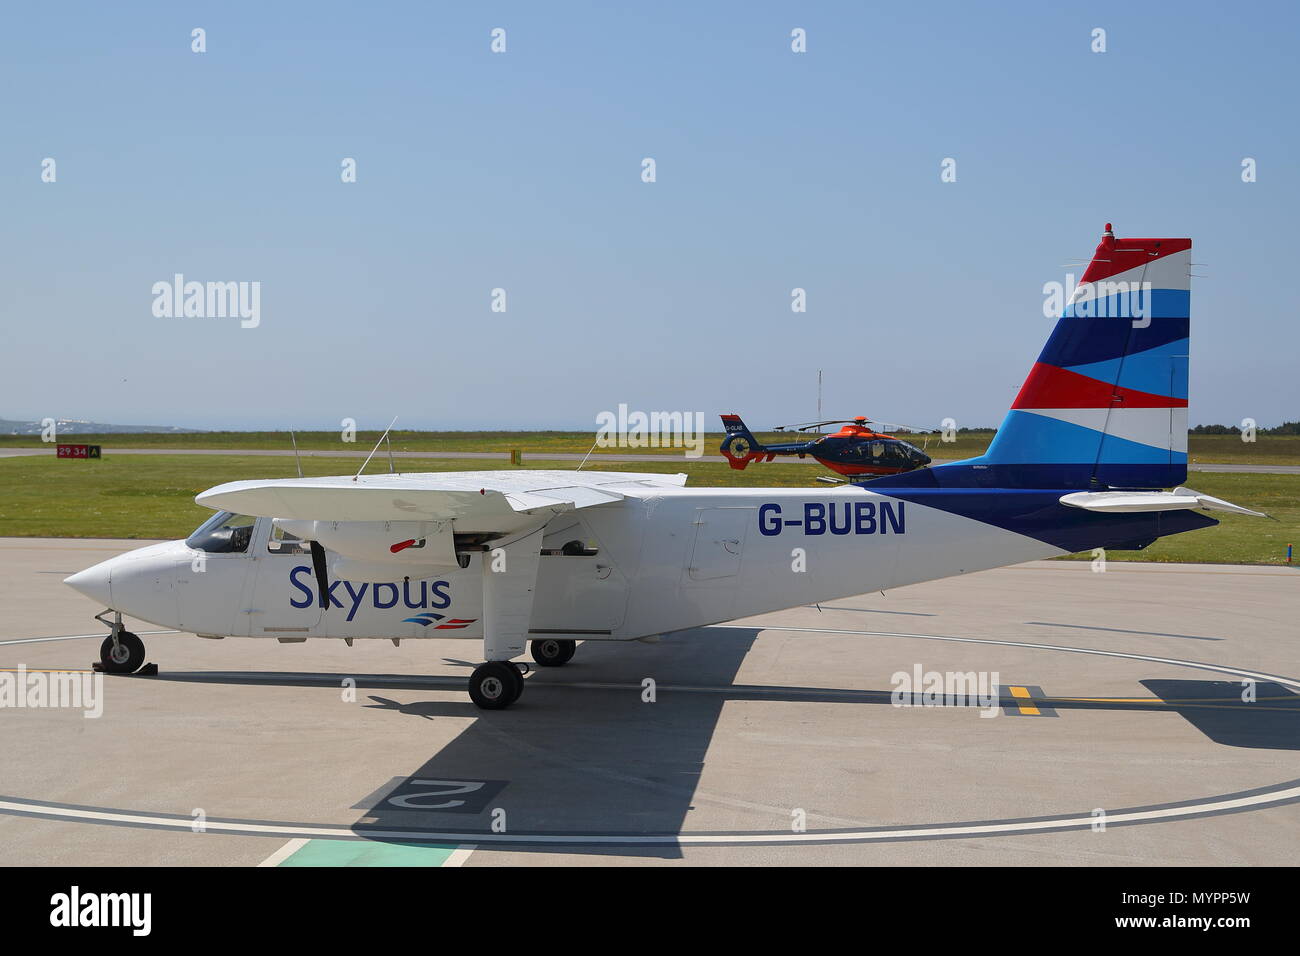 A Skybus Britten-Norman BN-2B G-BUBN at Lands End Airport, Cornwall, UK Stock Photo